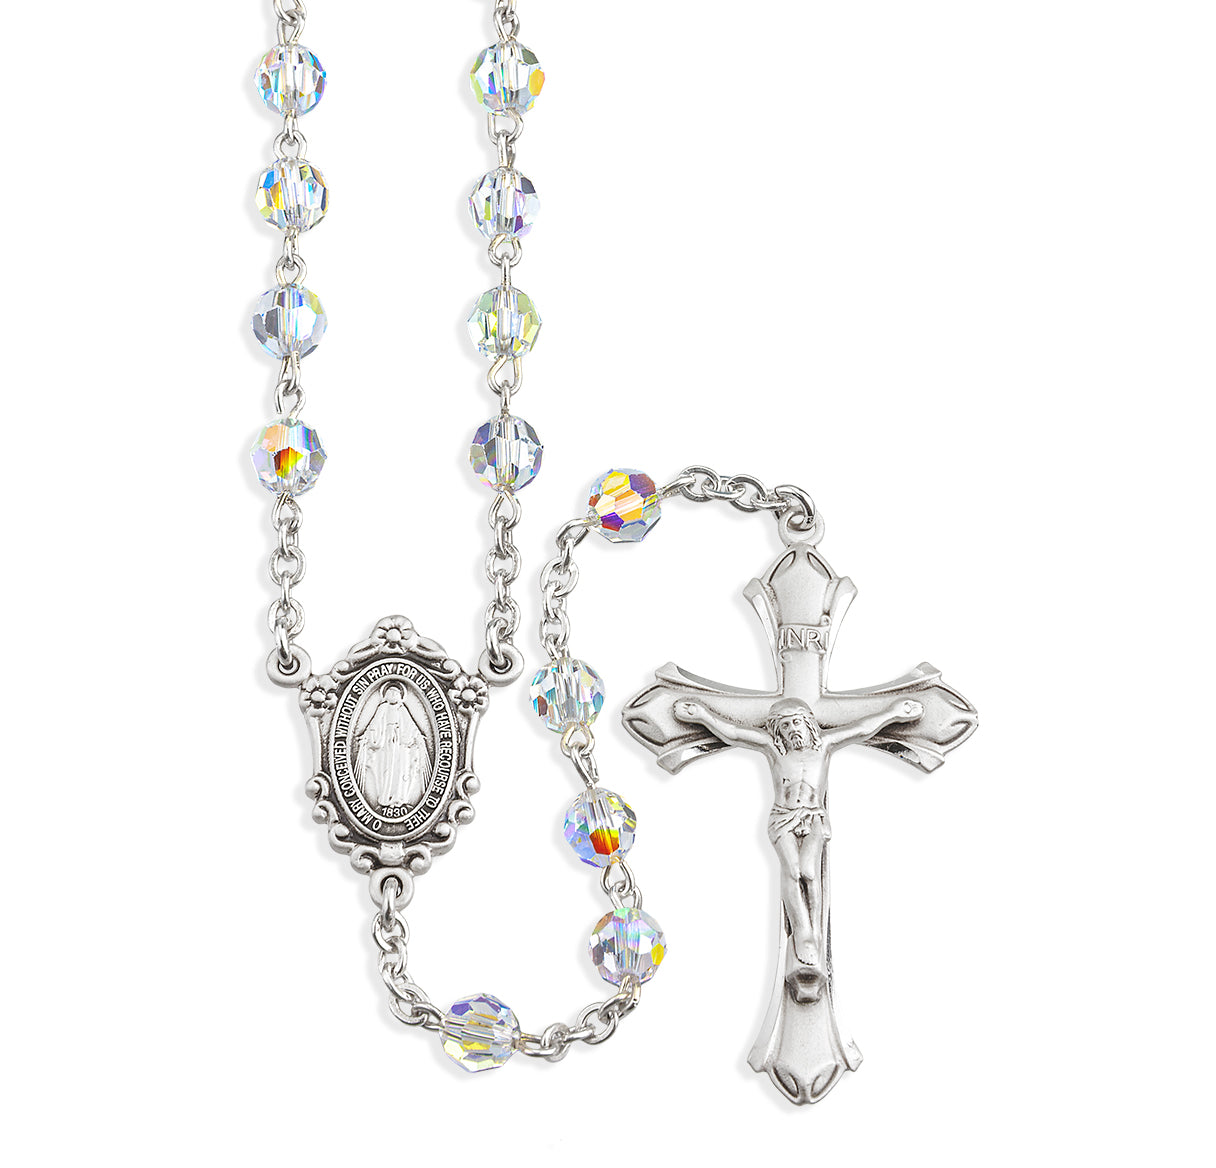 Rosary Sterling Crucifix and Centerpiece Created with Swarovski Crystal 6mm Faceted Round Aurora Borealis Beads by HMH